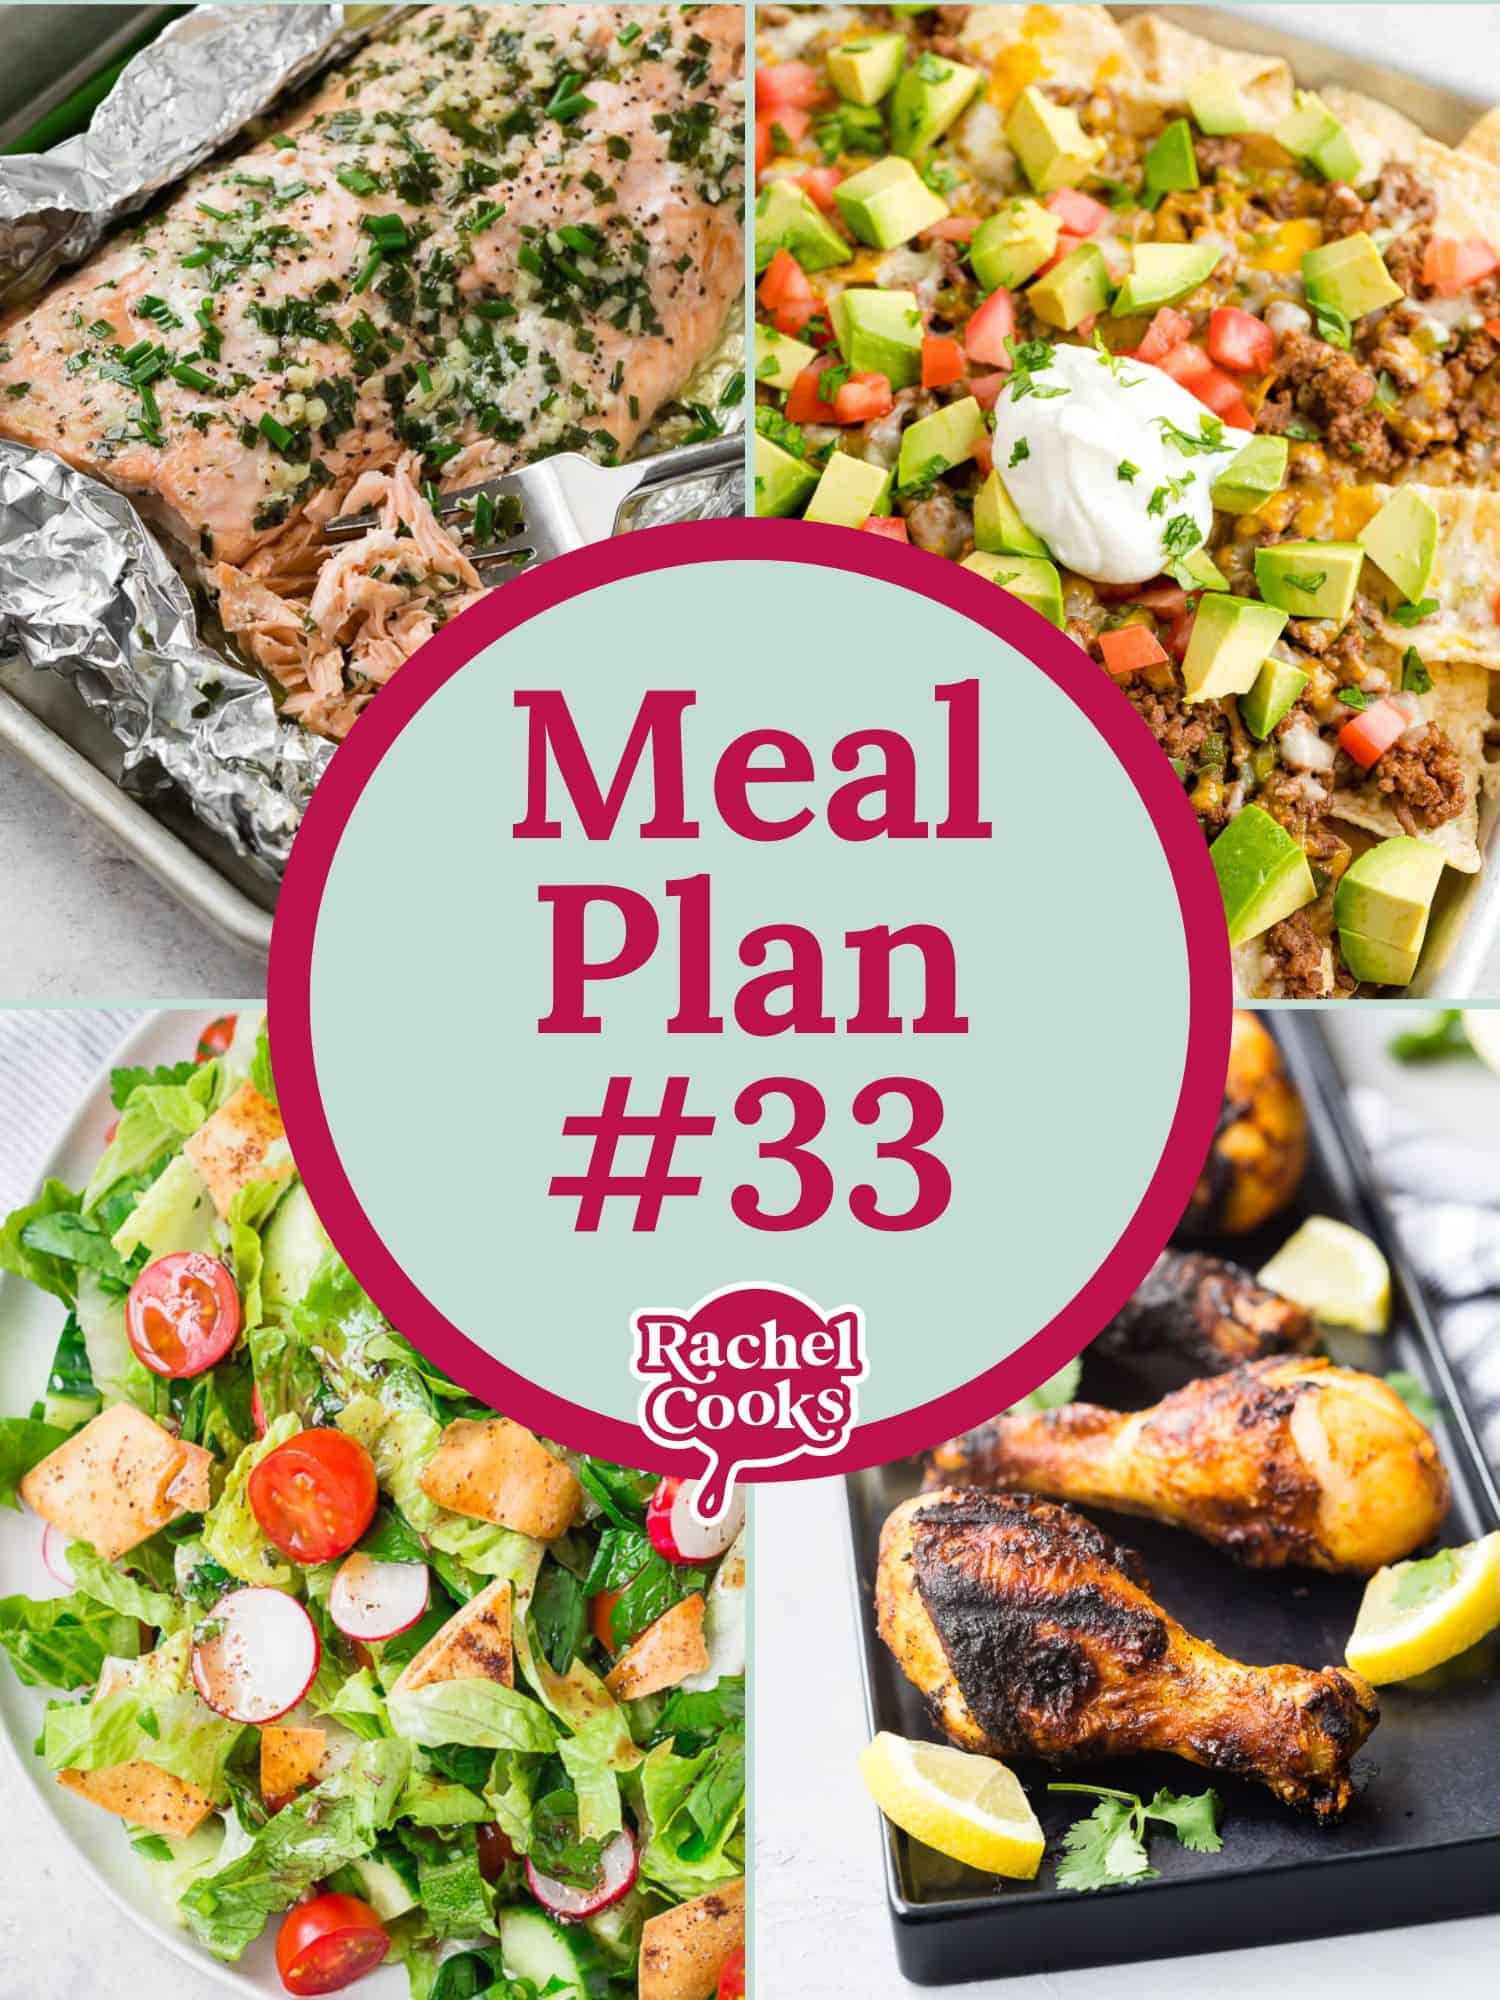 Meal plan 33 preview image with text and photos.